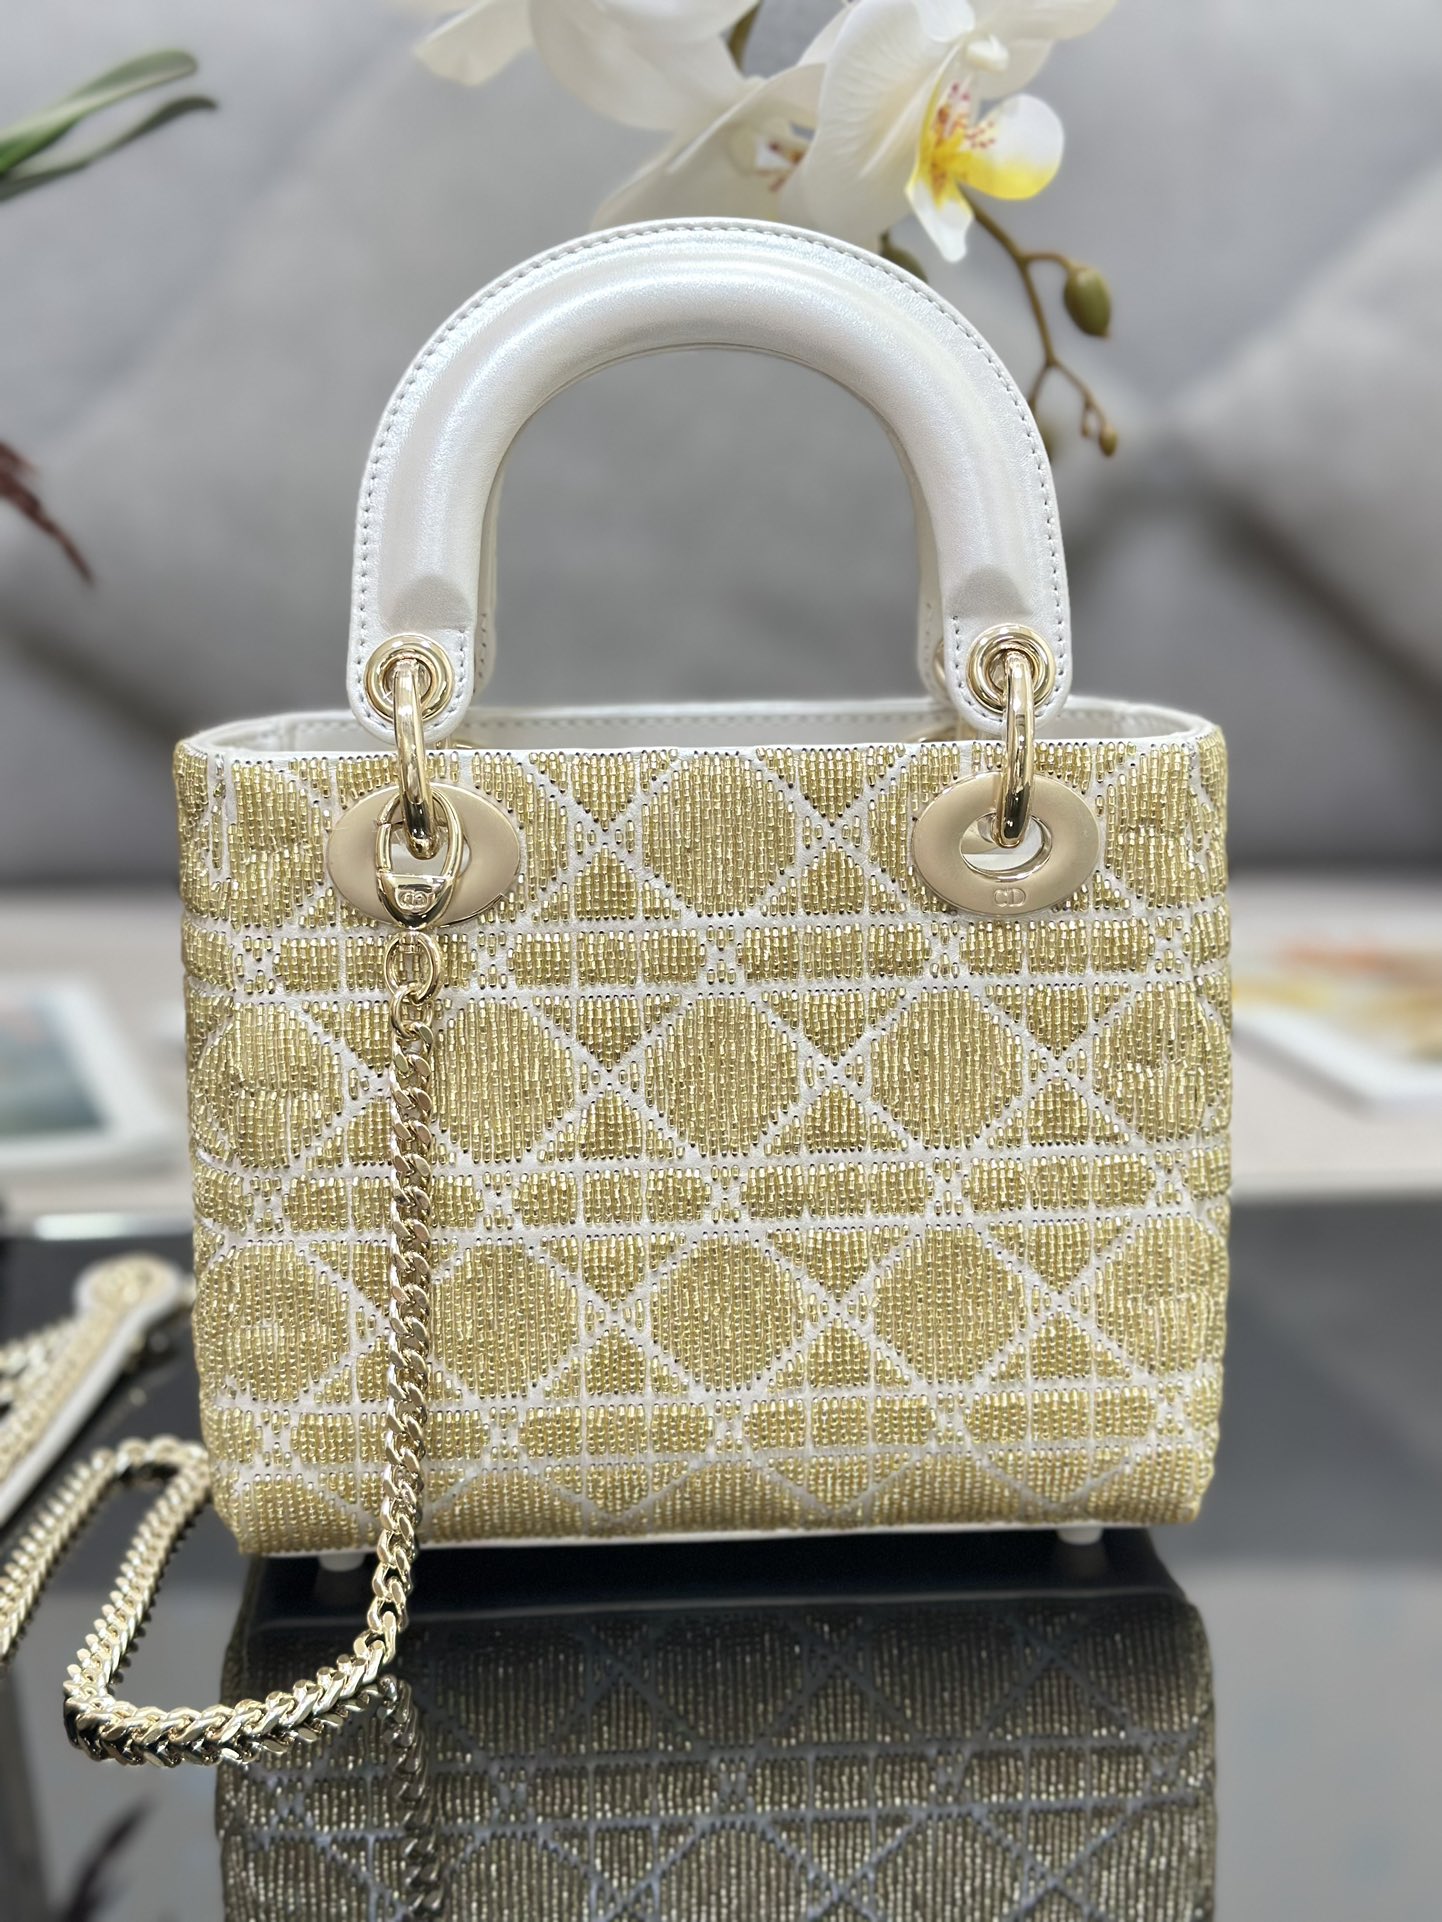 Replica Lady DIOR Bag with Three lattice embroidery limited edition bead tube gold